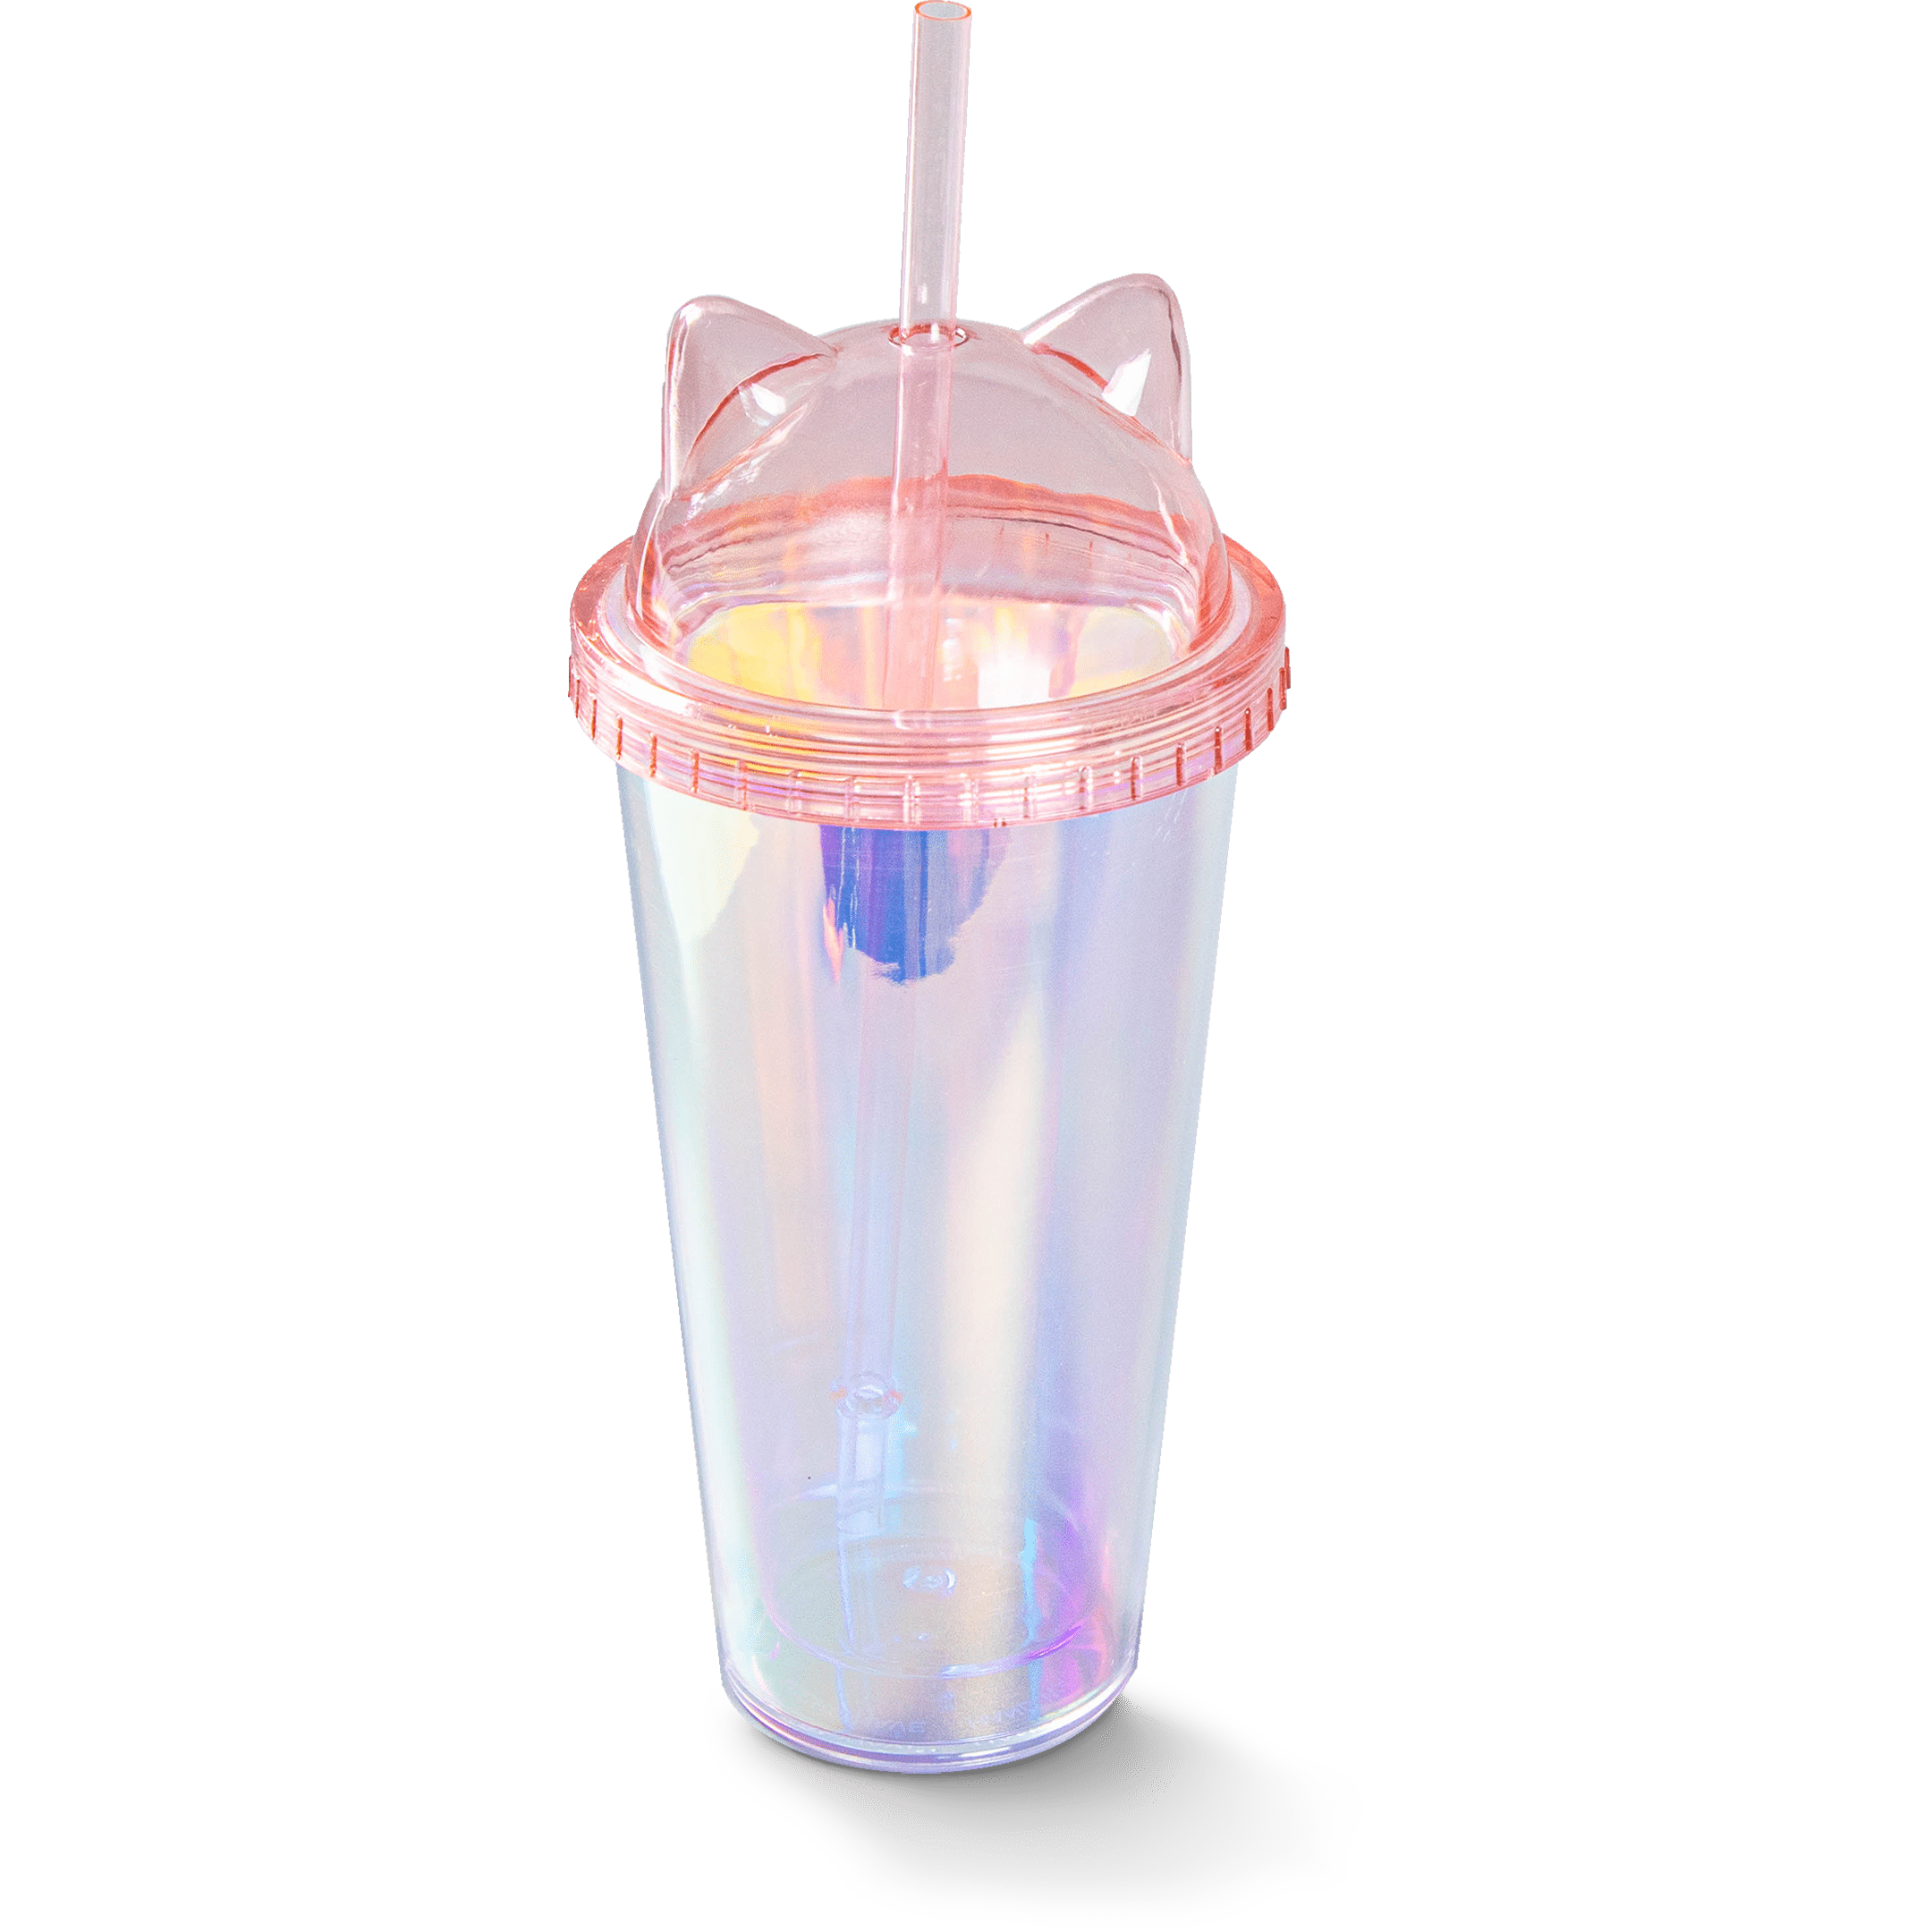 Glamour Cat Ear Tumbler - With Lid and Straw - Gray - Pink - White -  ApolloBox